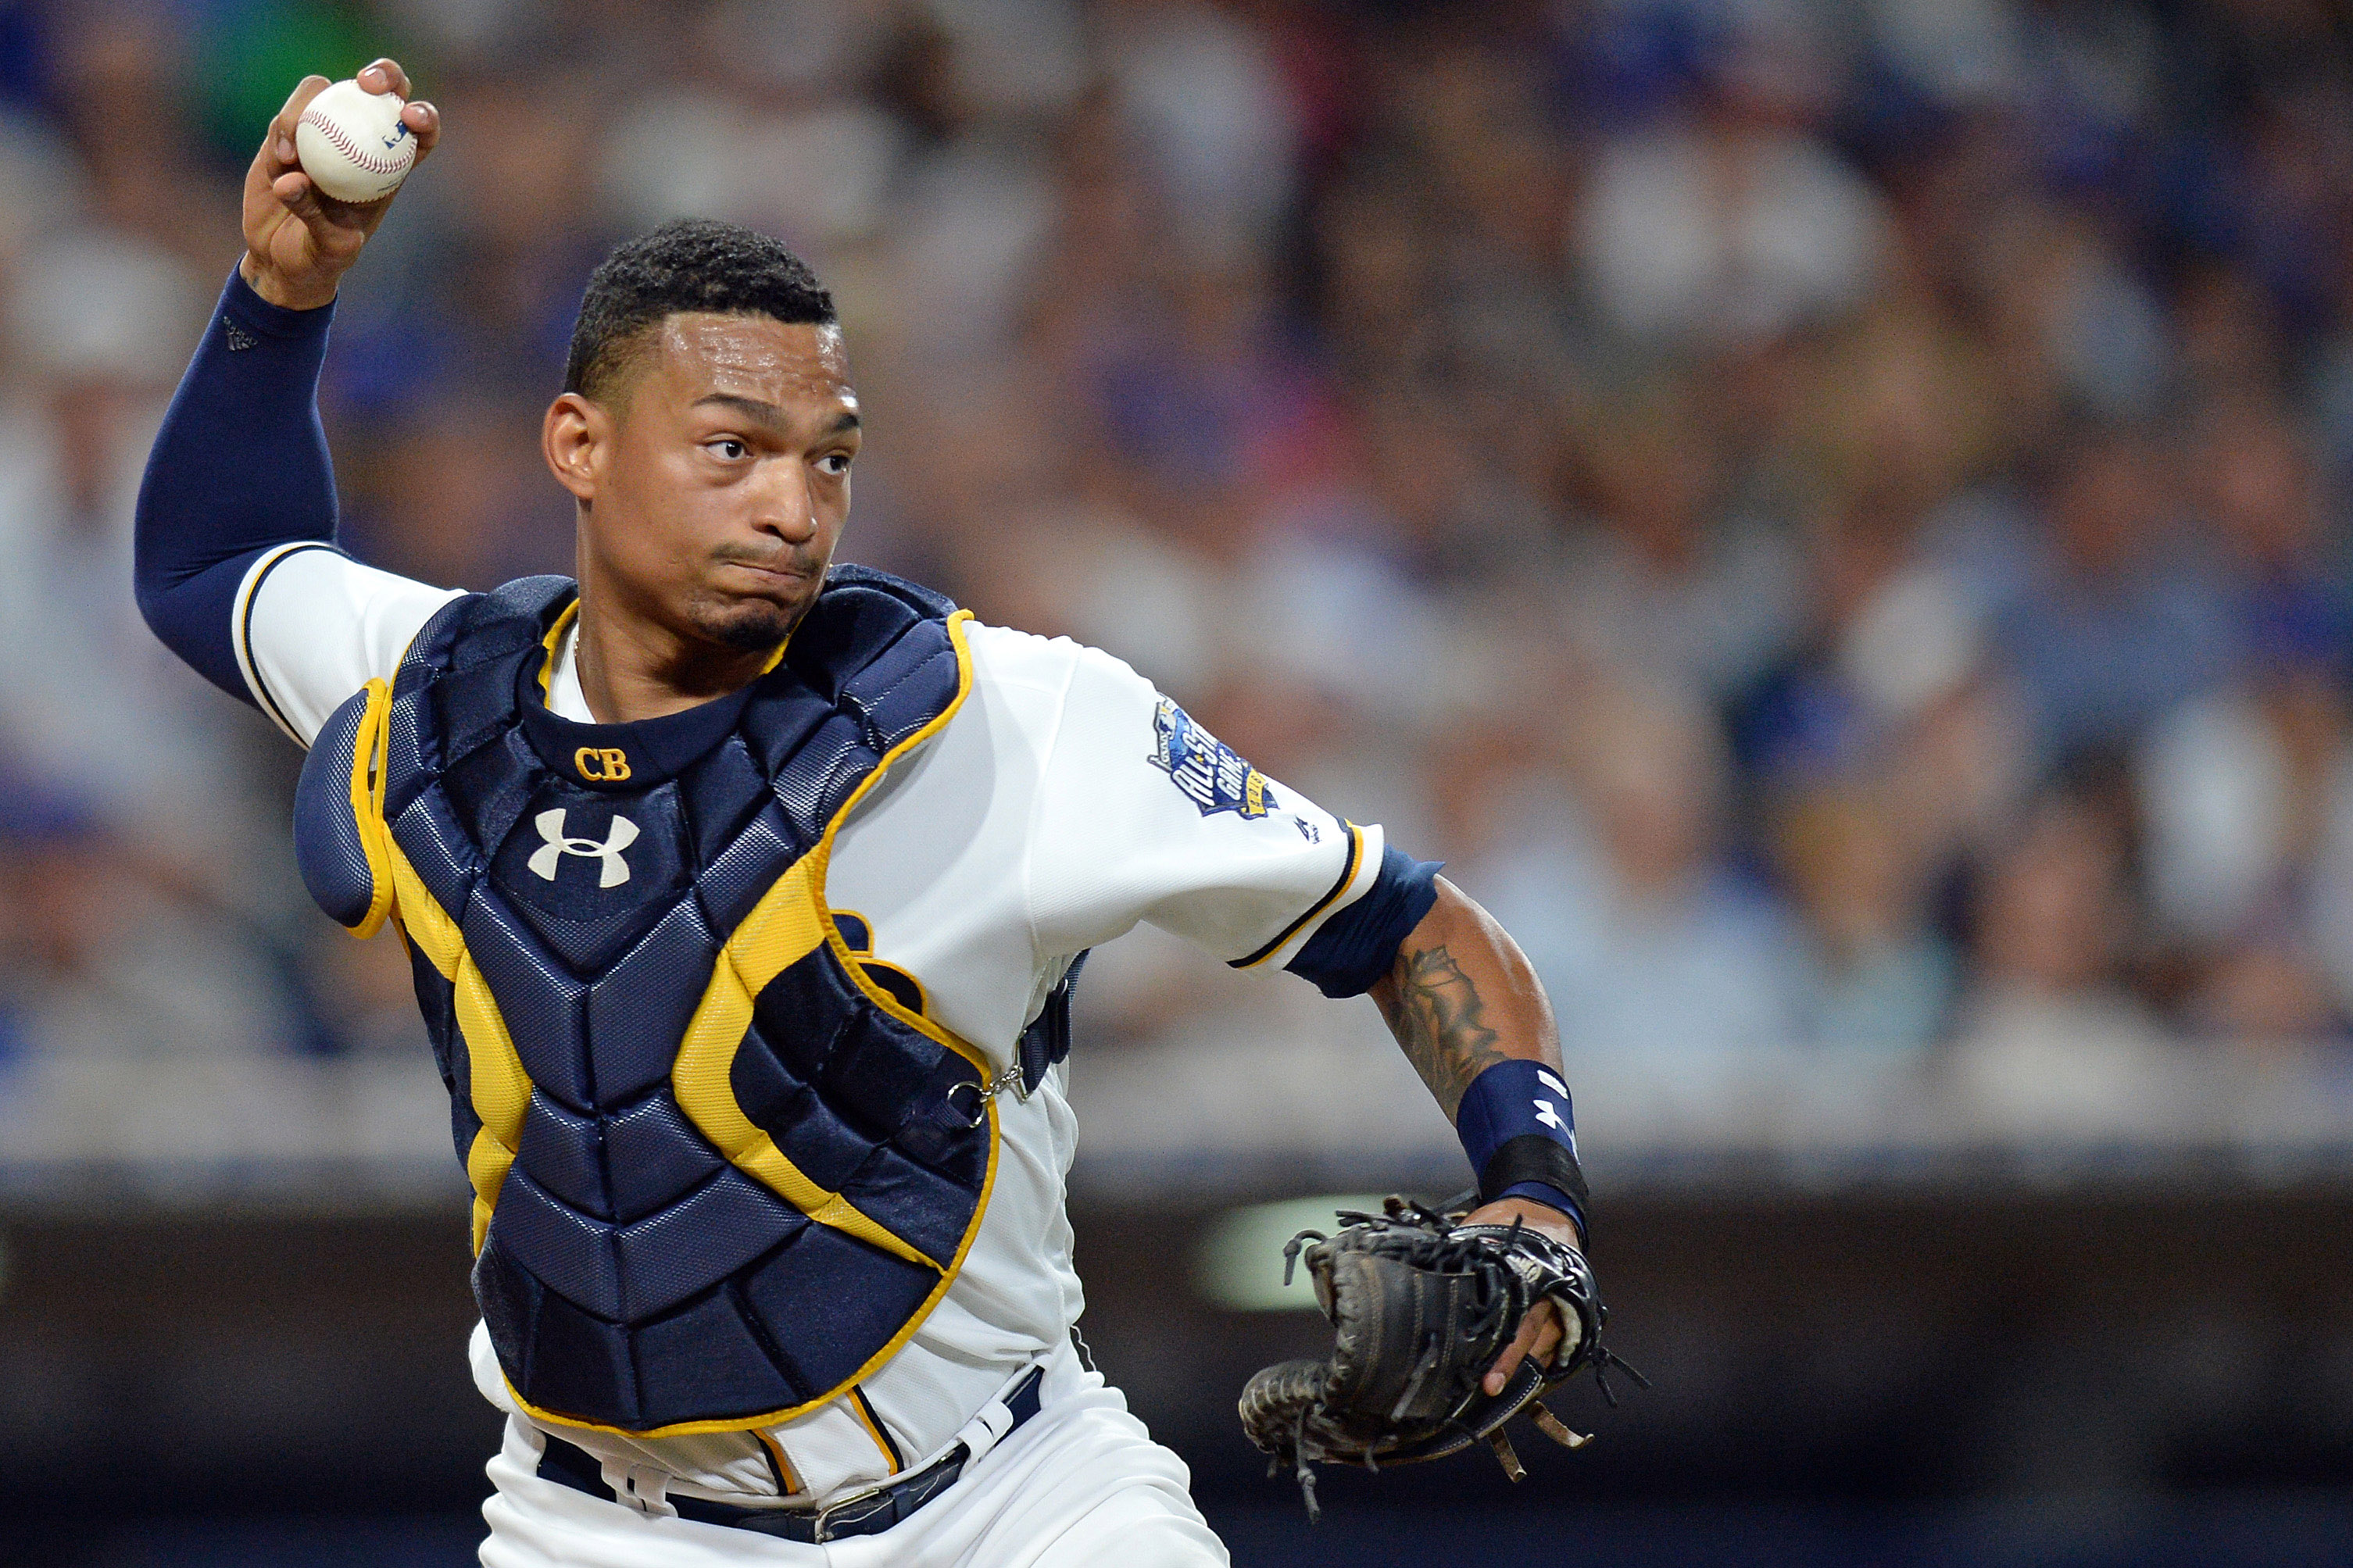 2012 Futures Game: Christian Bethancourt Selected To Play For